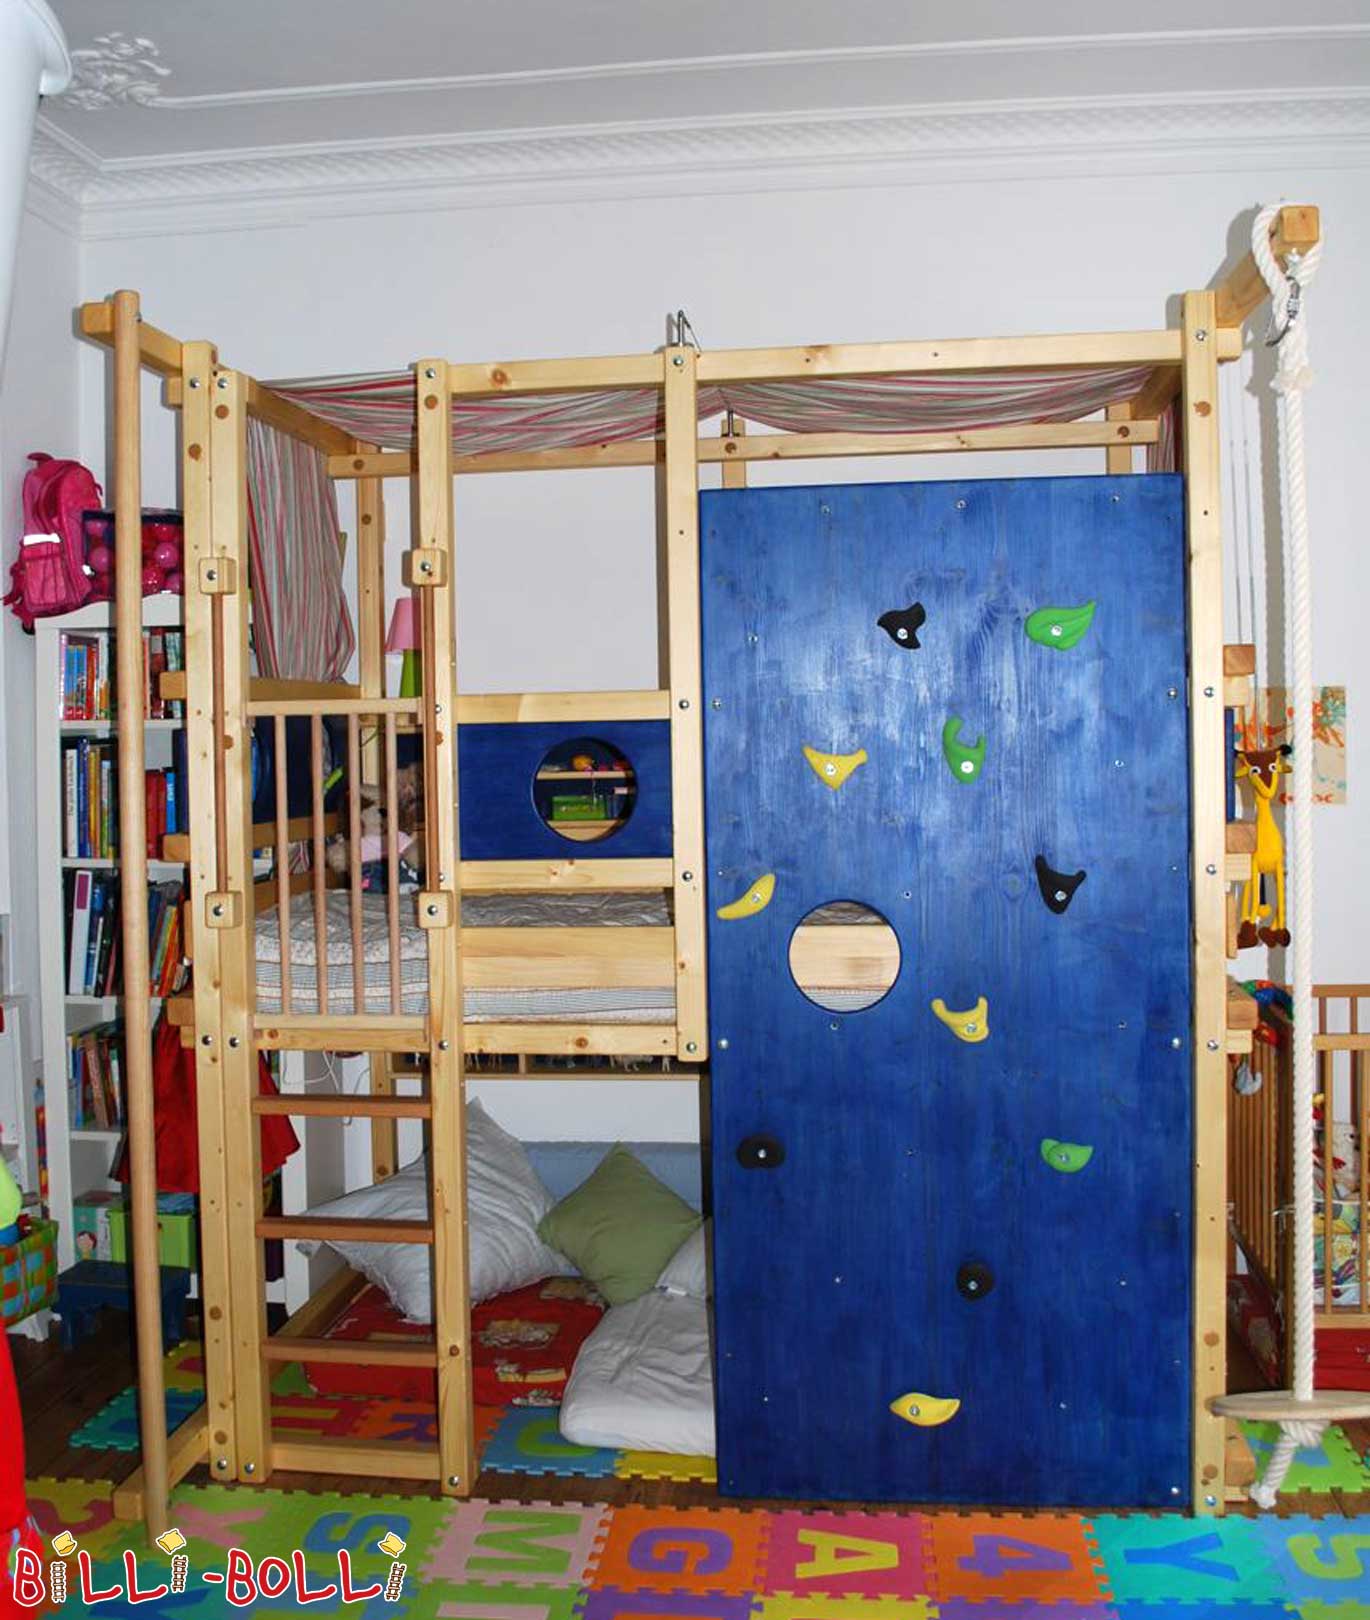 Today I’d like to finally send you a few photos of our fantastic Billi-Bolli … (Loft Bed Adjustable by Age)